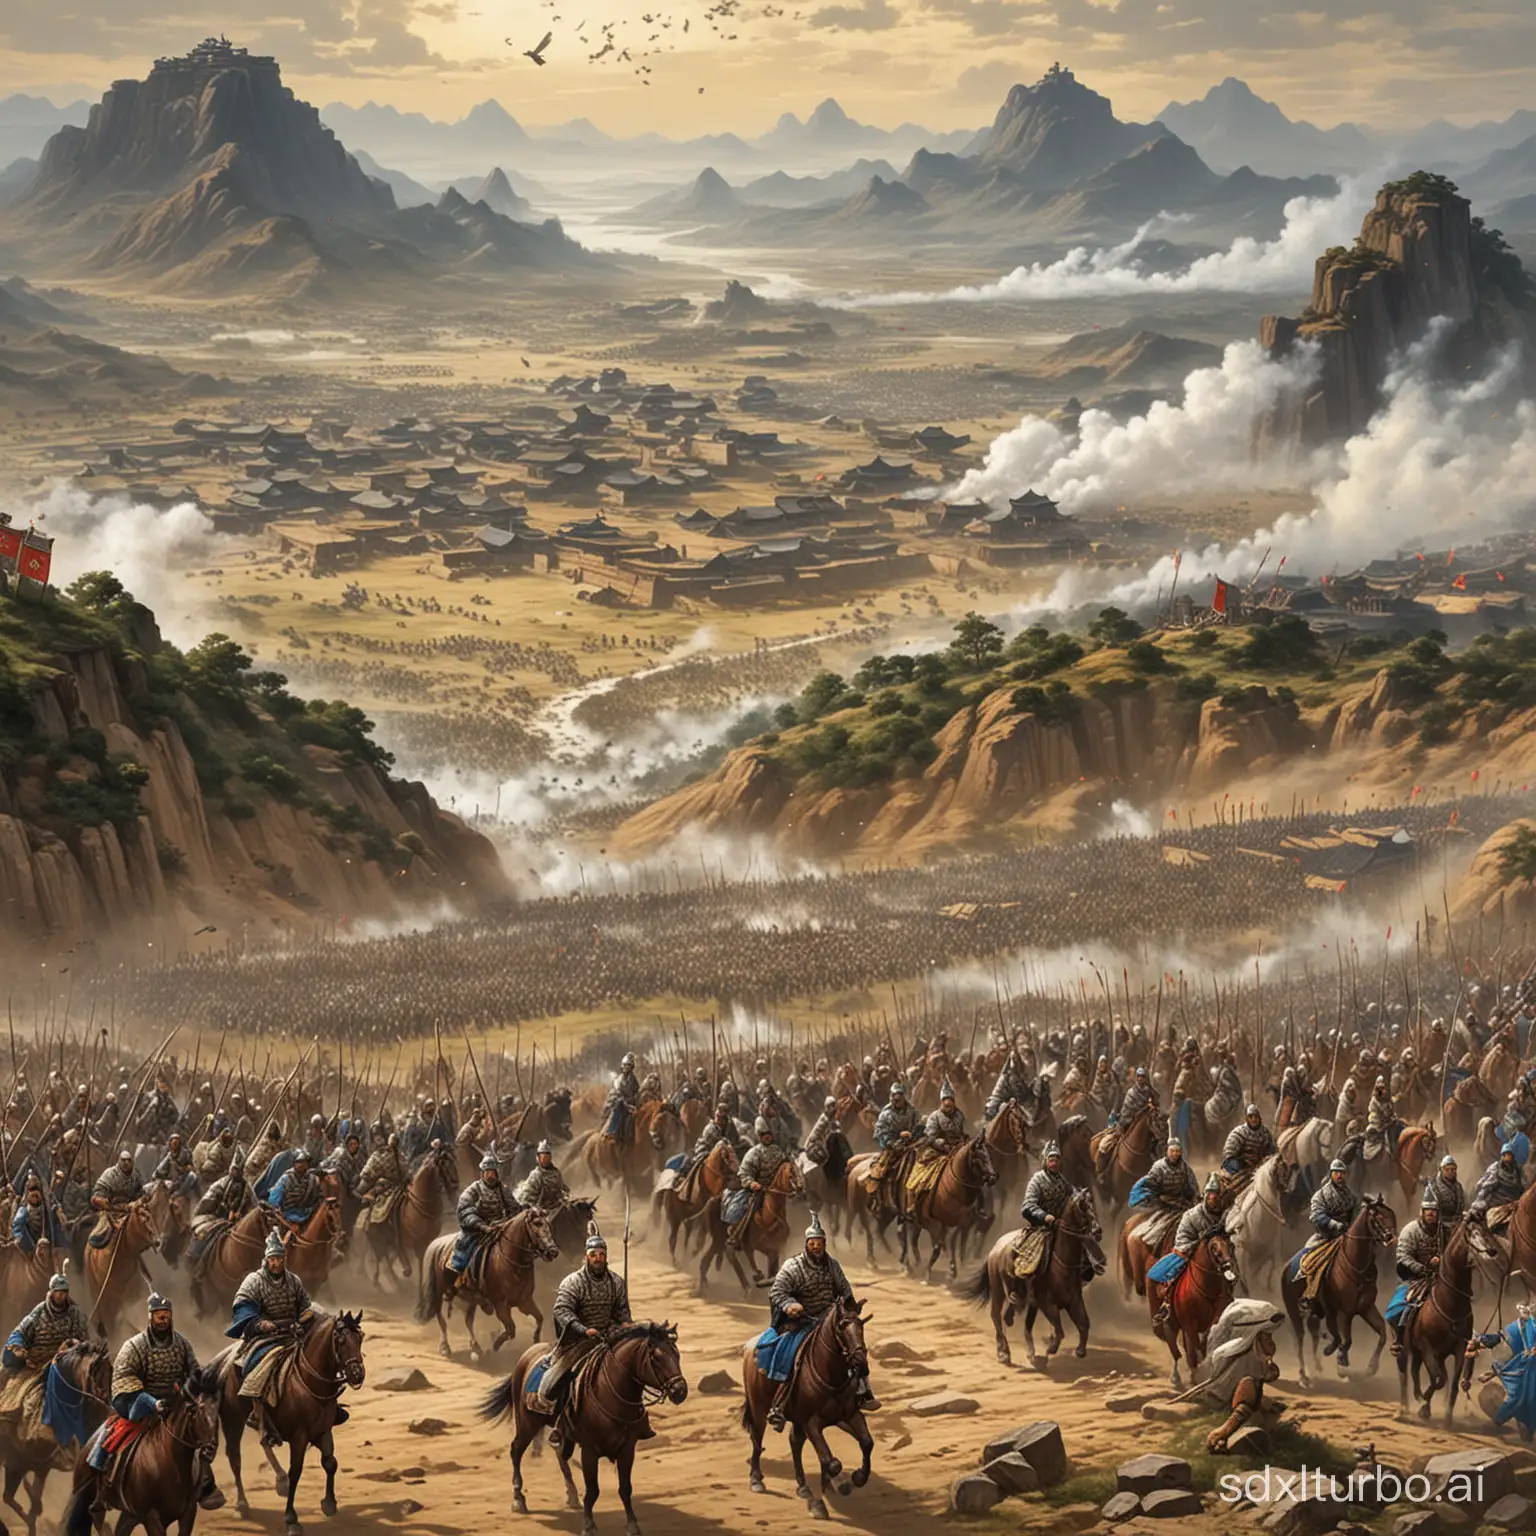 During the Three Kingdoms period, Zhuge Liang defended Jiaping. Zhuge Liang sat on the hilltop, strategizing and planning. Arrows rained down from the defenders, causing the Wei army to scatter in disarray.